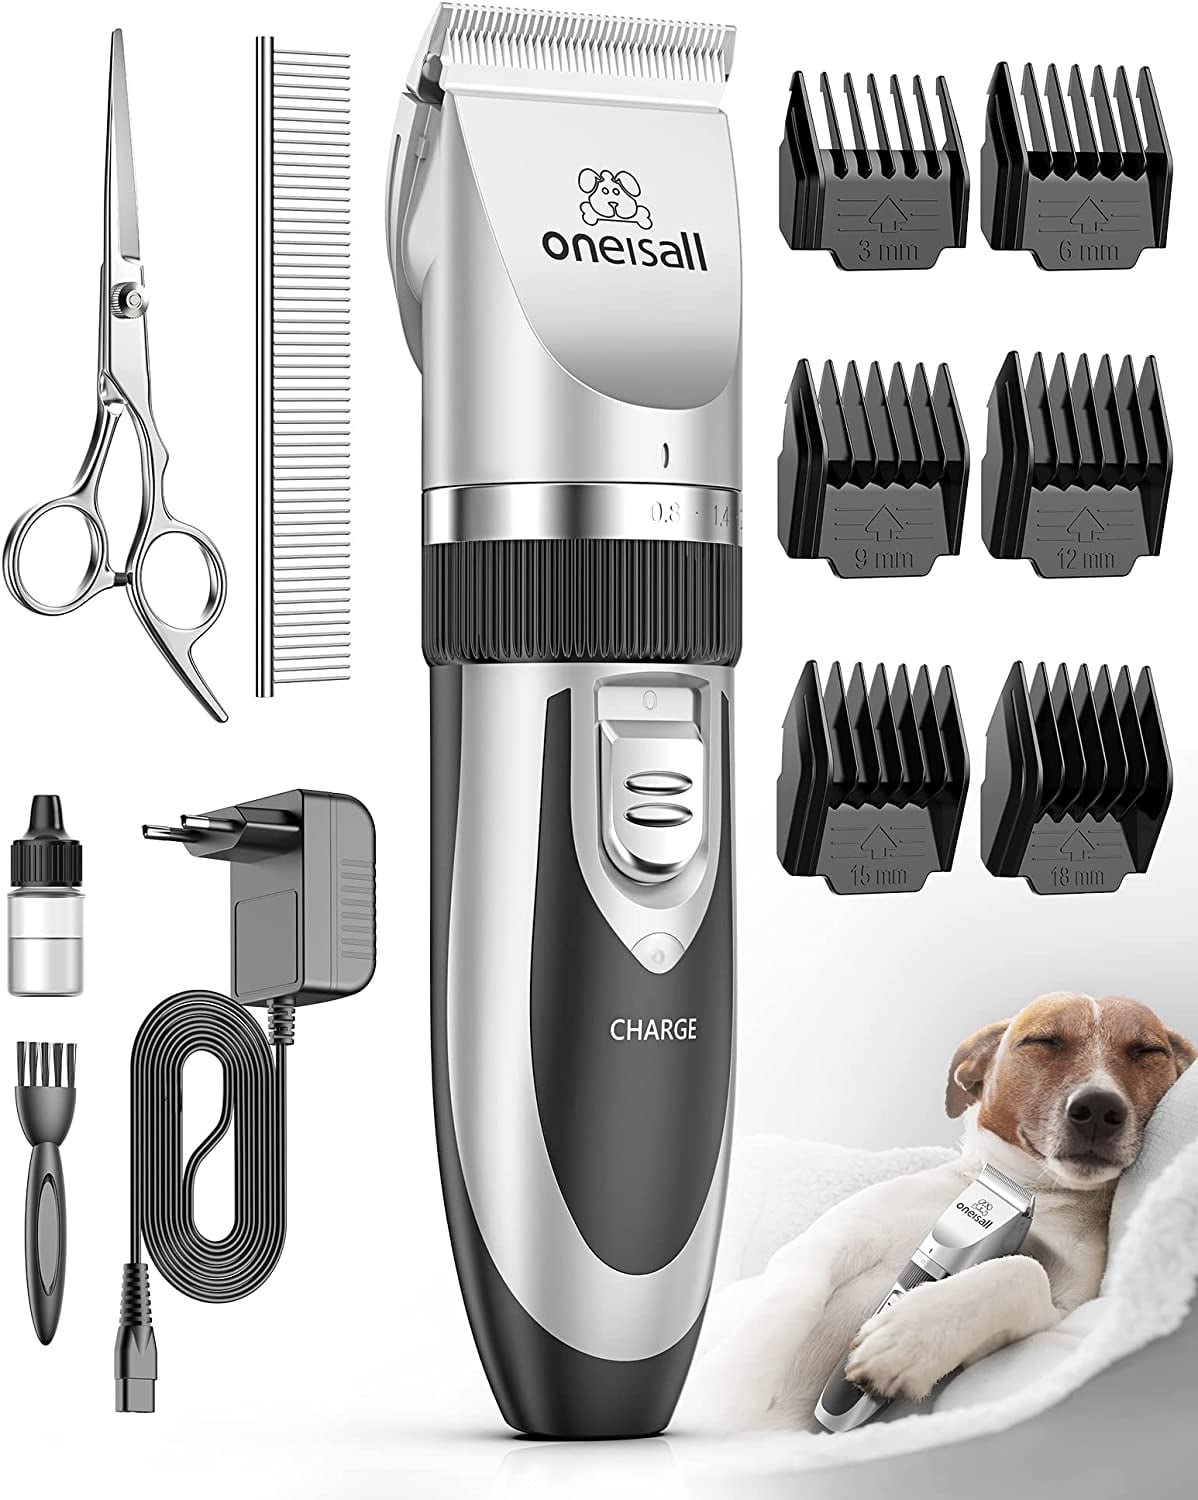 what is the quietest dog clipper